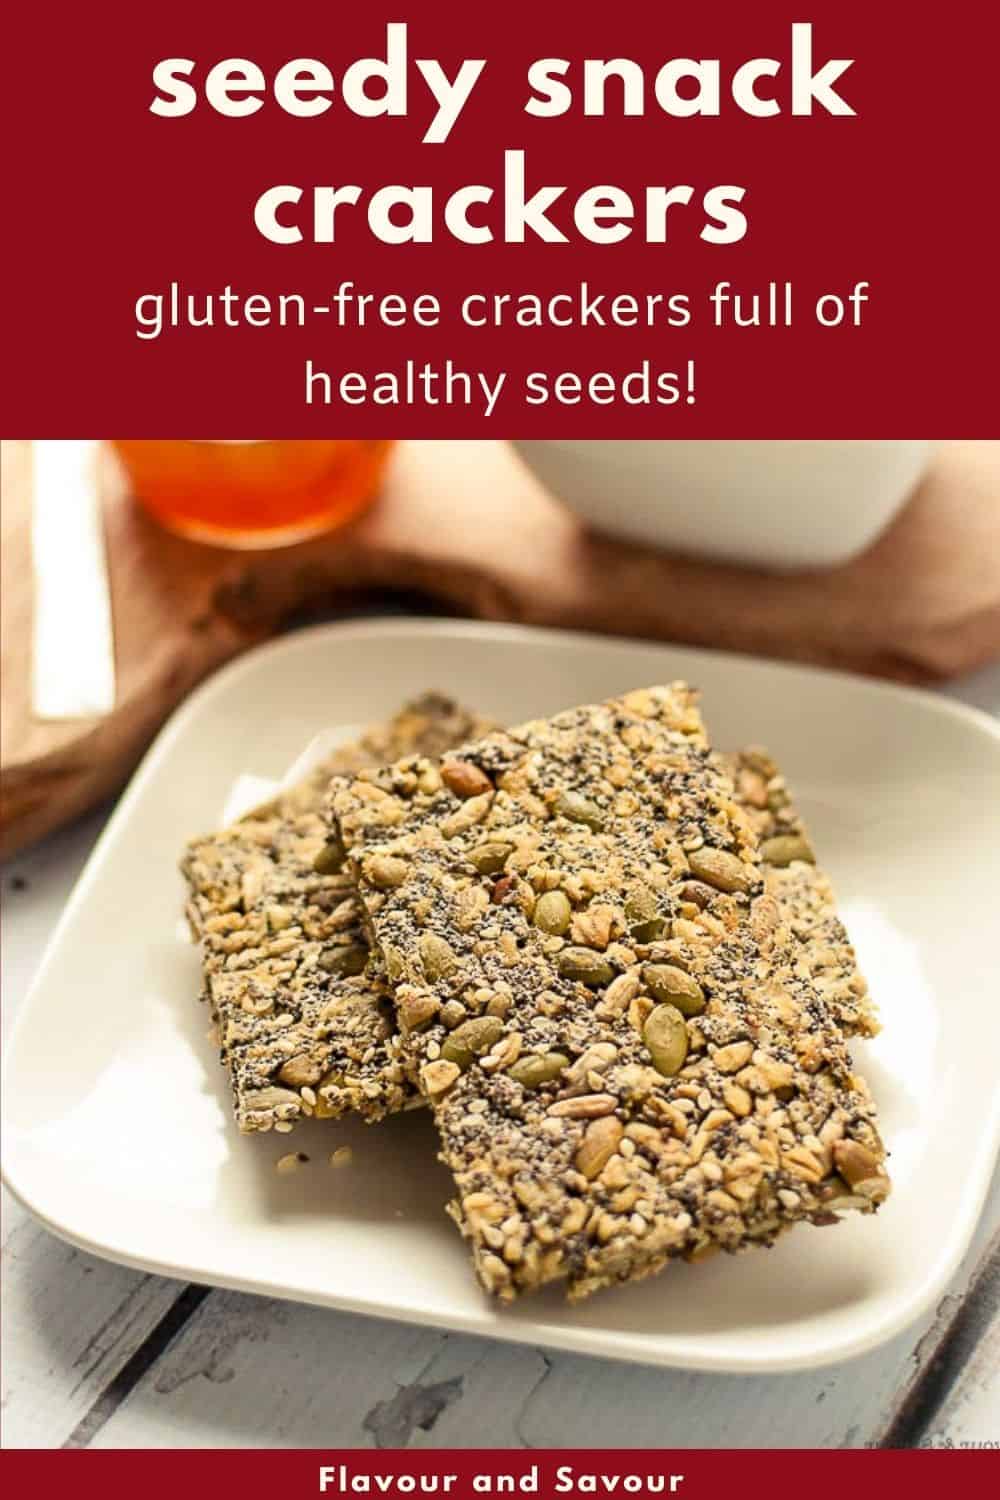 Super Seedy Snack Crackers - Flavour and Savour